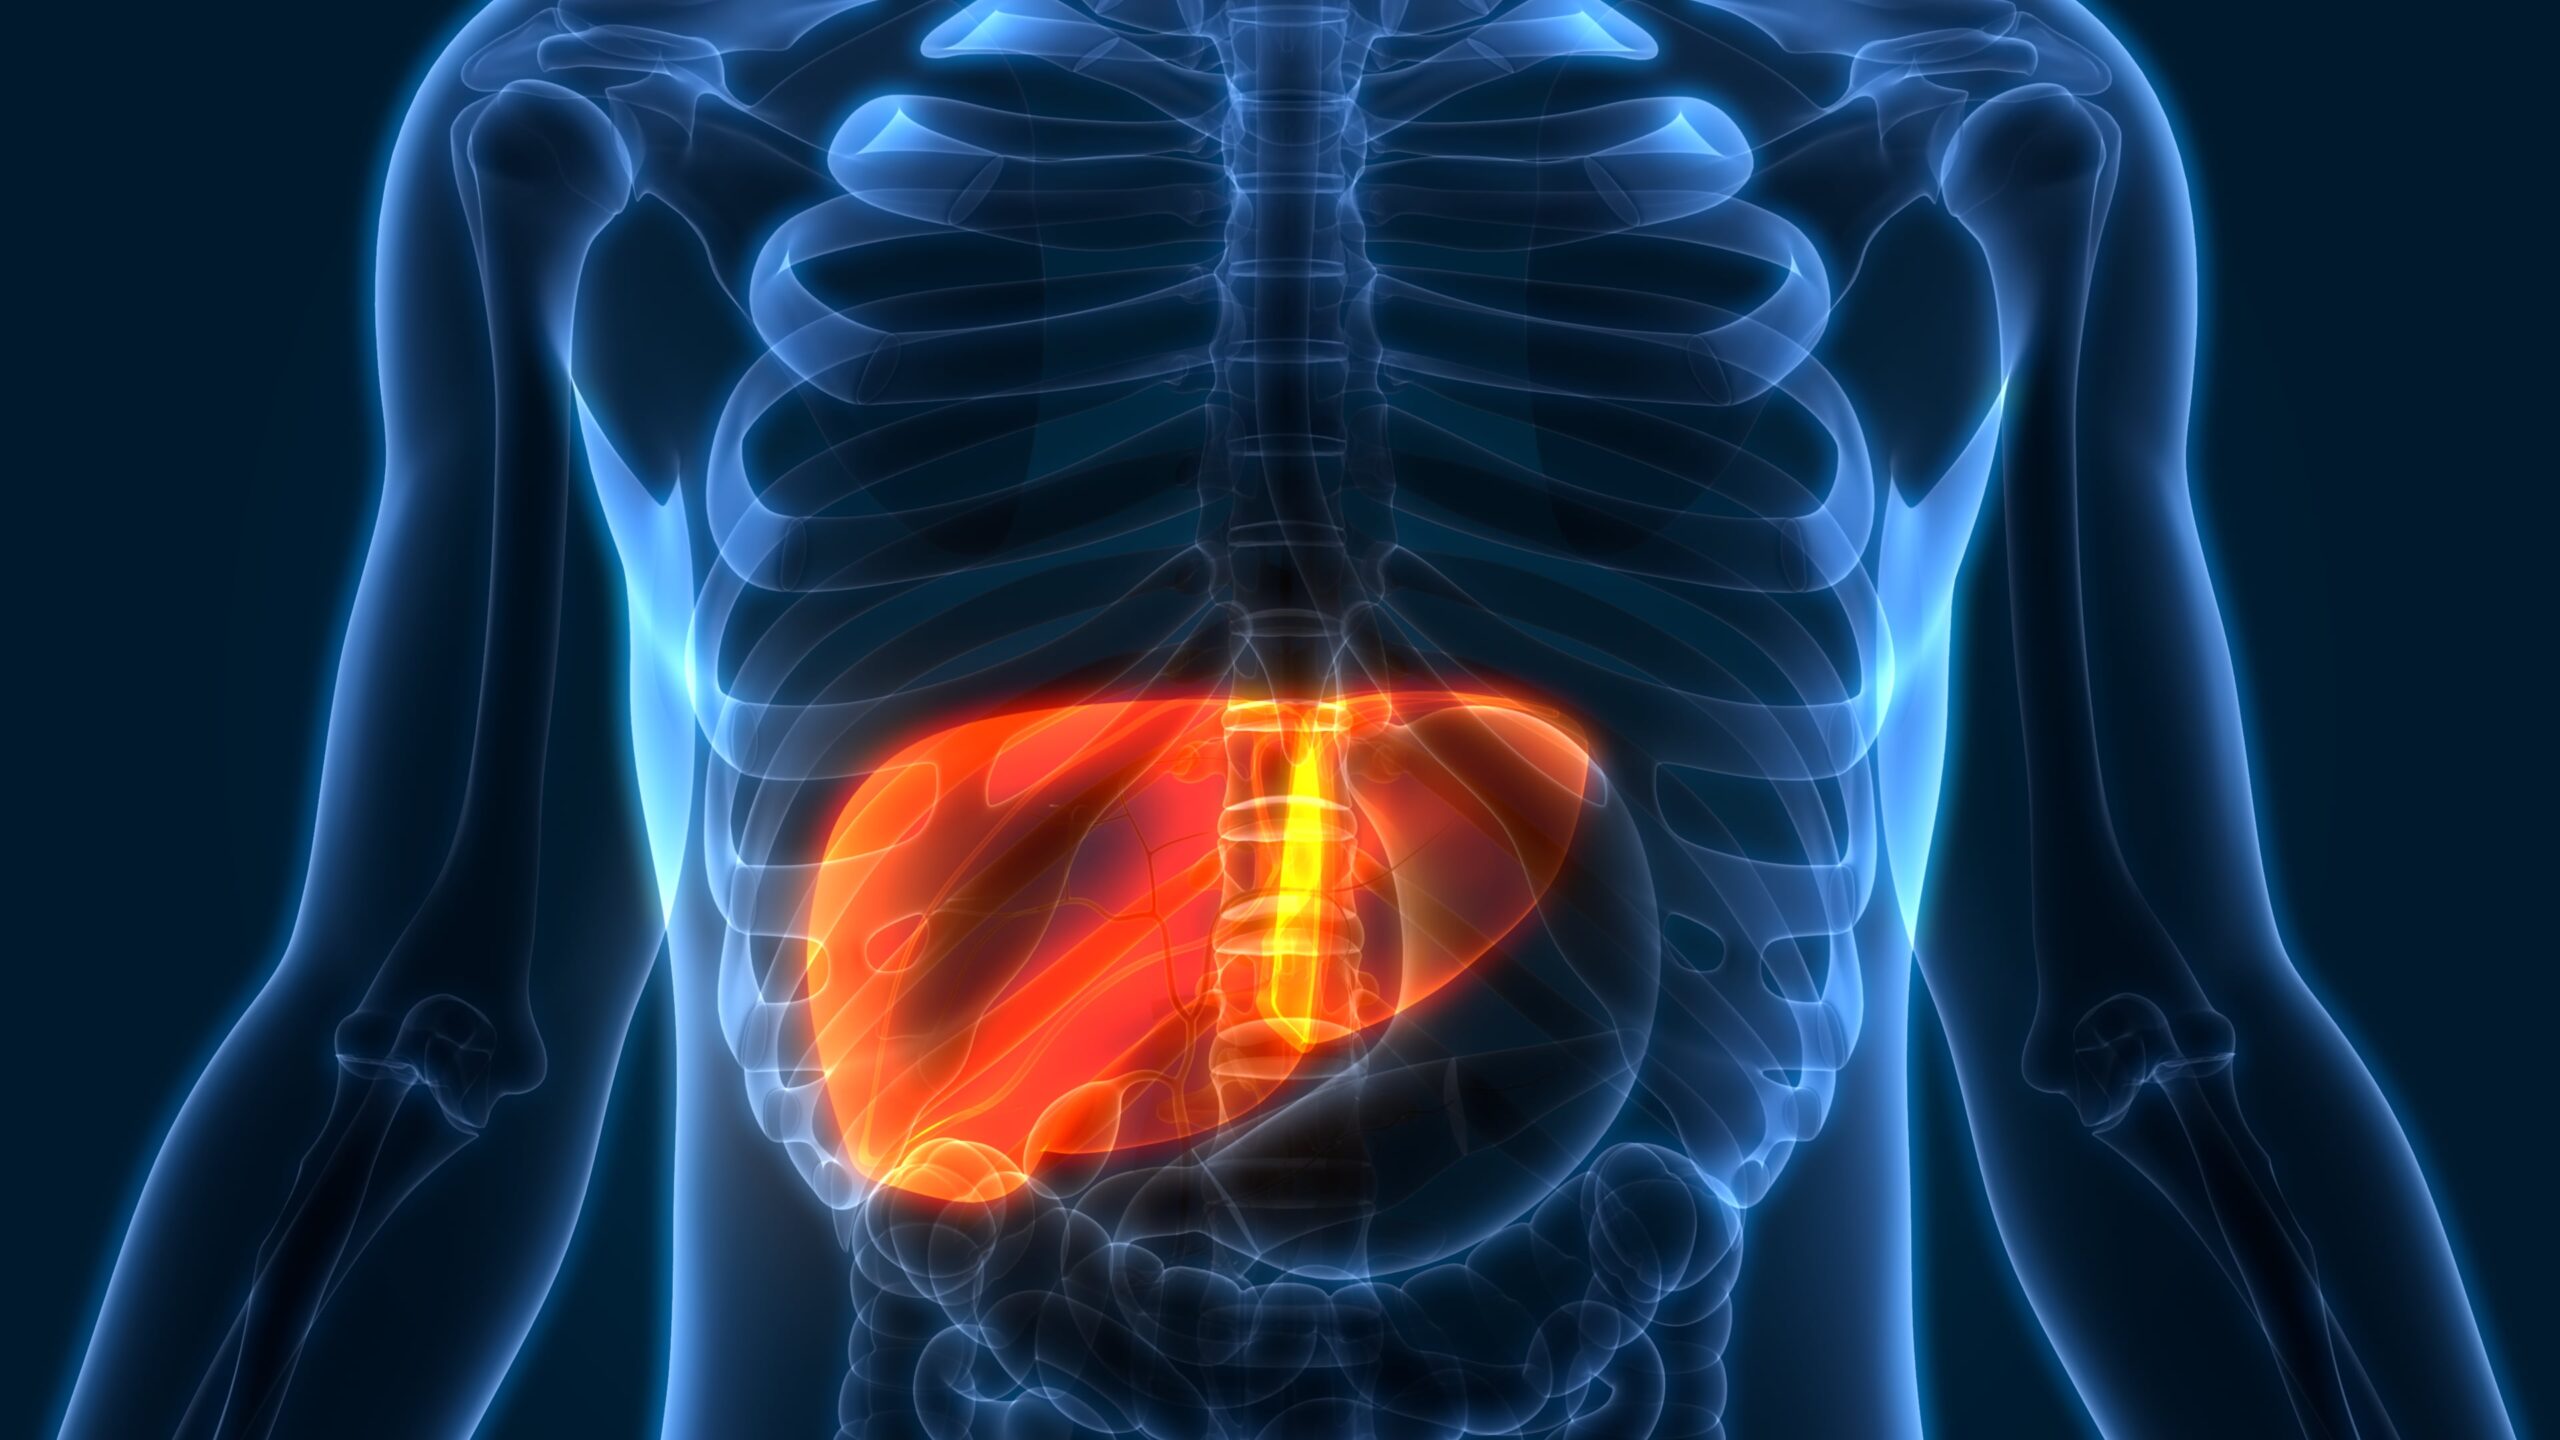 Graphic illustration of anatomy, liver highlighted